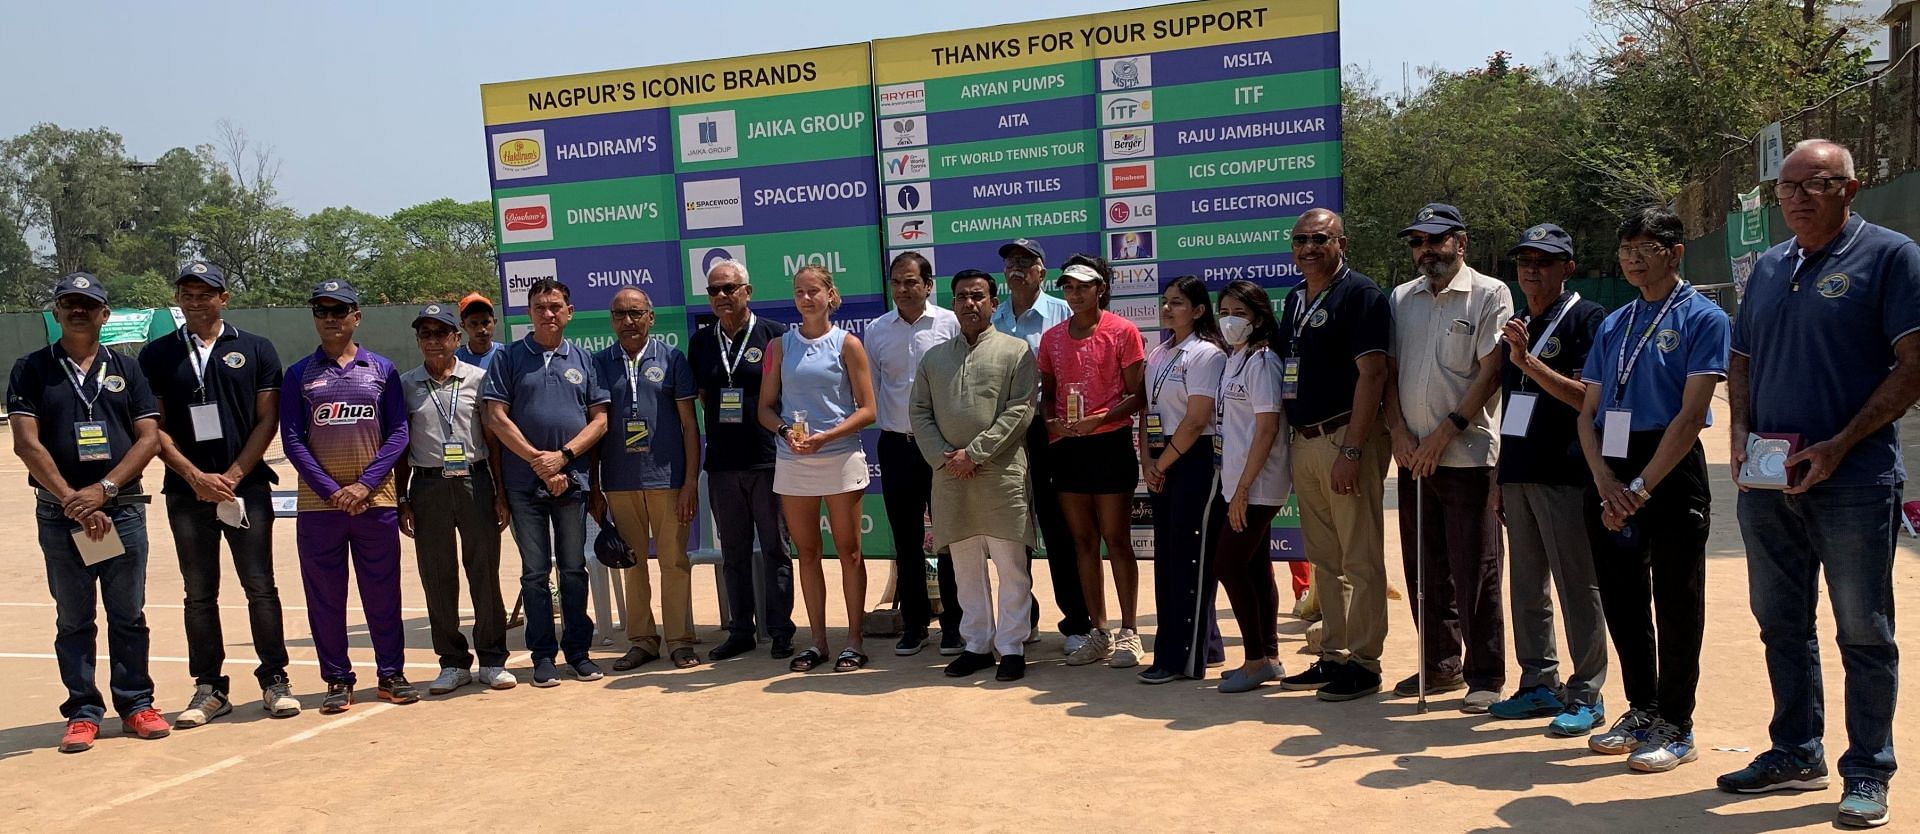 Women&#039;s singles finalists Sahaja Yamalapalli of India and Emily Seibold of Germany with the guests in Nagpur on Sunday. (Pic credit: NDHTA)